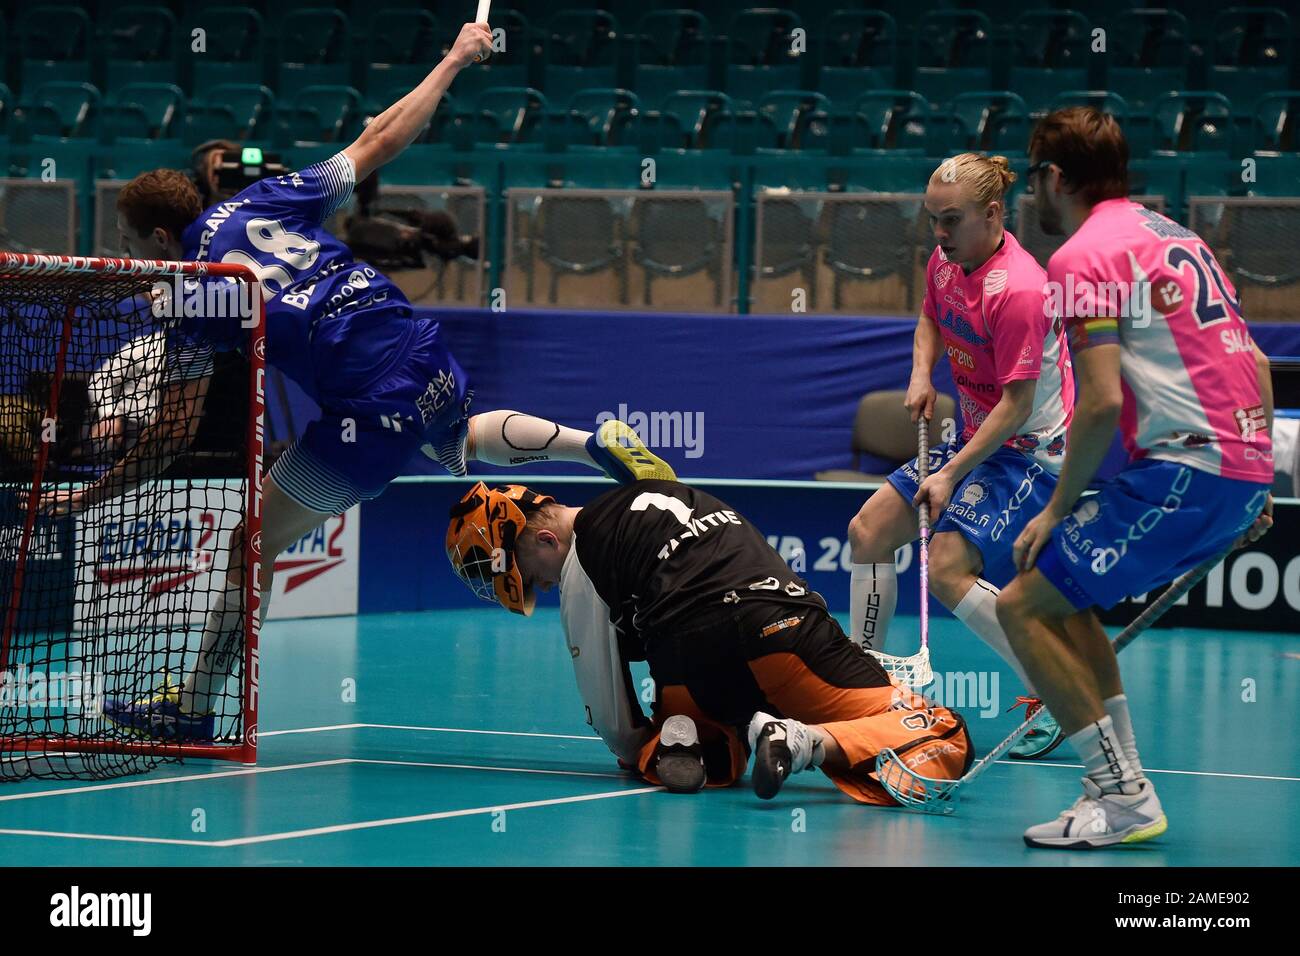 Ostrava, Czech Republic. 12th Jan, 2020. L-R Jiri Besta (Vitkovice), Markus Talvitie, Here Pulkkinen and Nico Salo (all Classic) in action during the IFF Floorball Champions Cup 2020, men's 3rd place match between 1st SC Vitkovice (Czech Republic) and Classic (Finland), on January 12, 2020, in Ostrava, Czech Republic. Credit: Jaroslav Ozana/CTK Photo/Alamy Live News Stock Photo